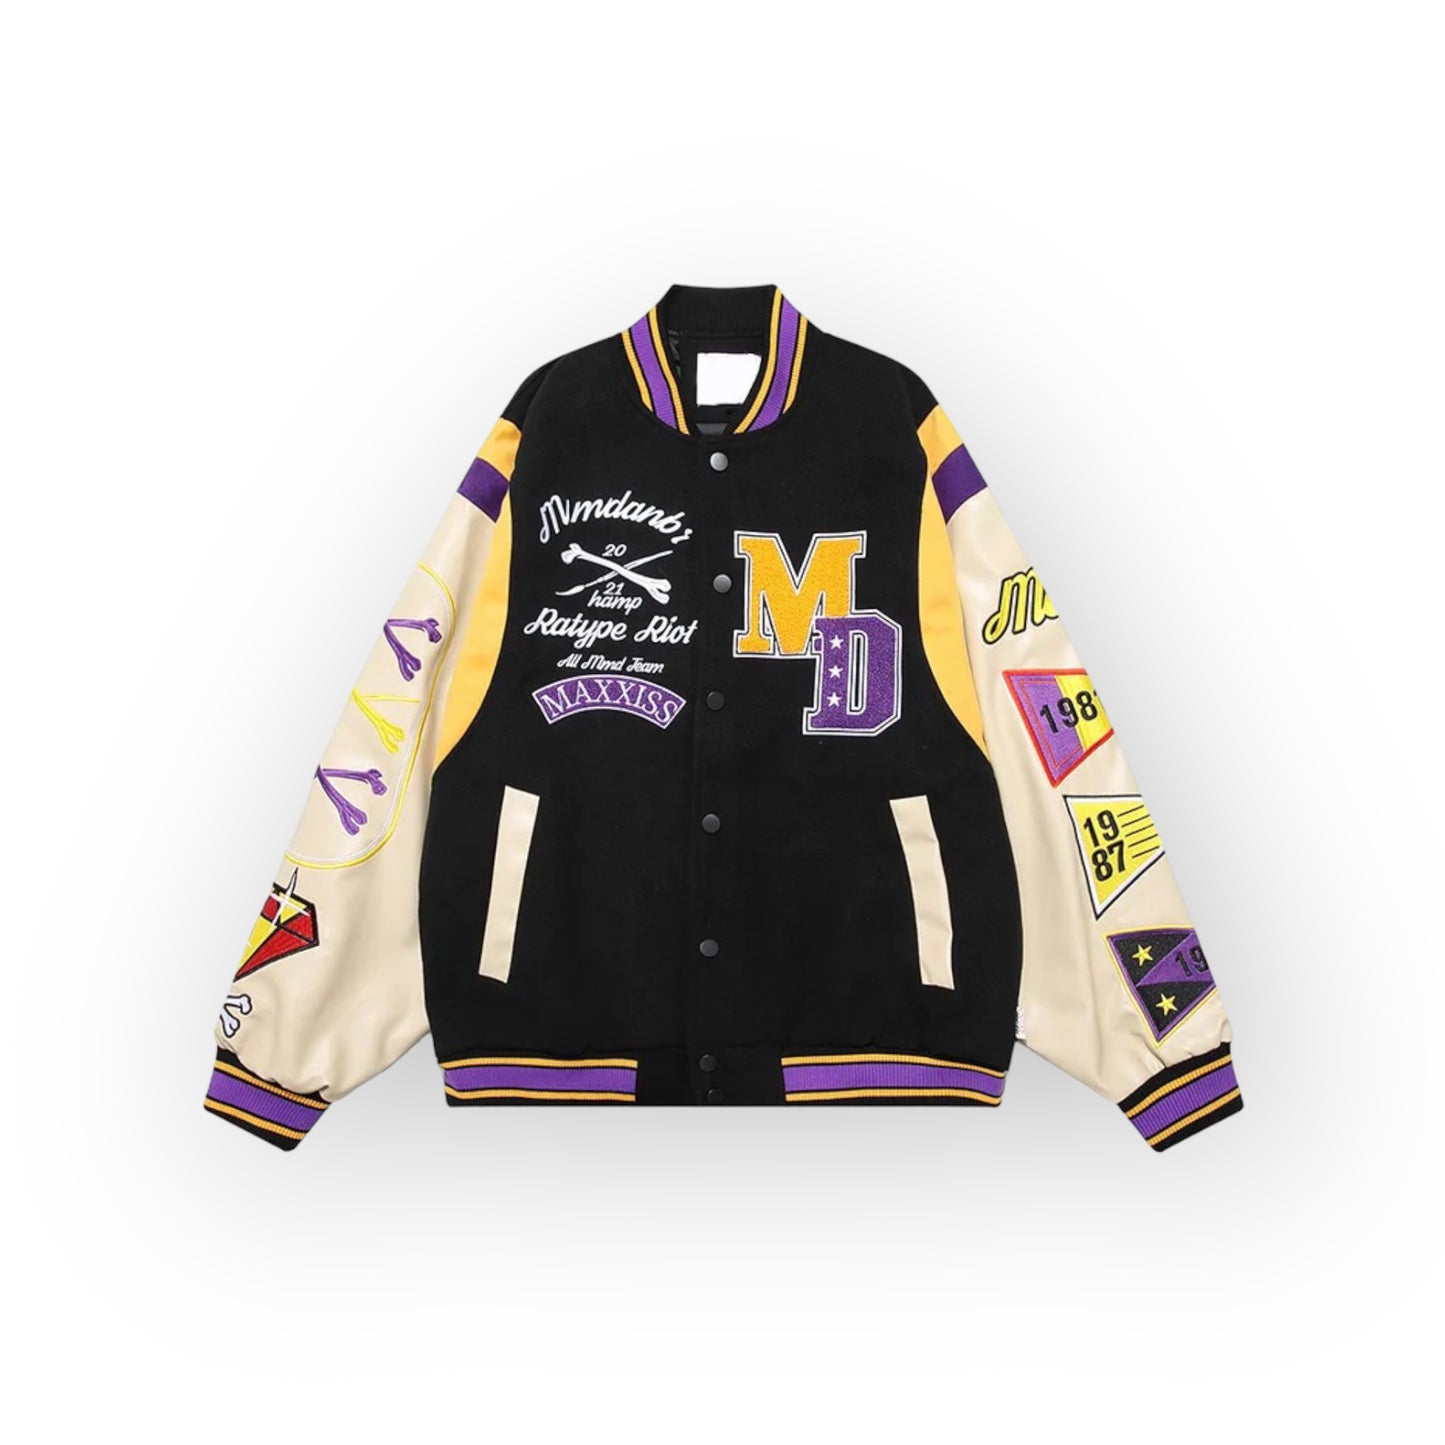 Aolamegs Embroidery Patchwork Letter Graphic Jacket